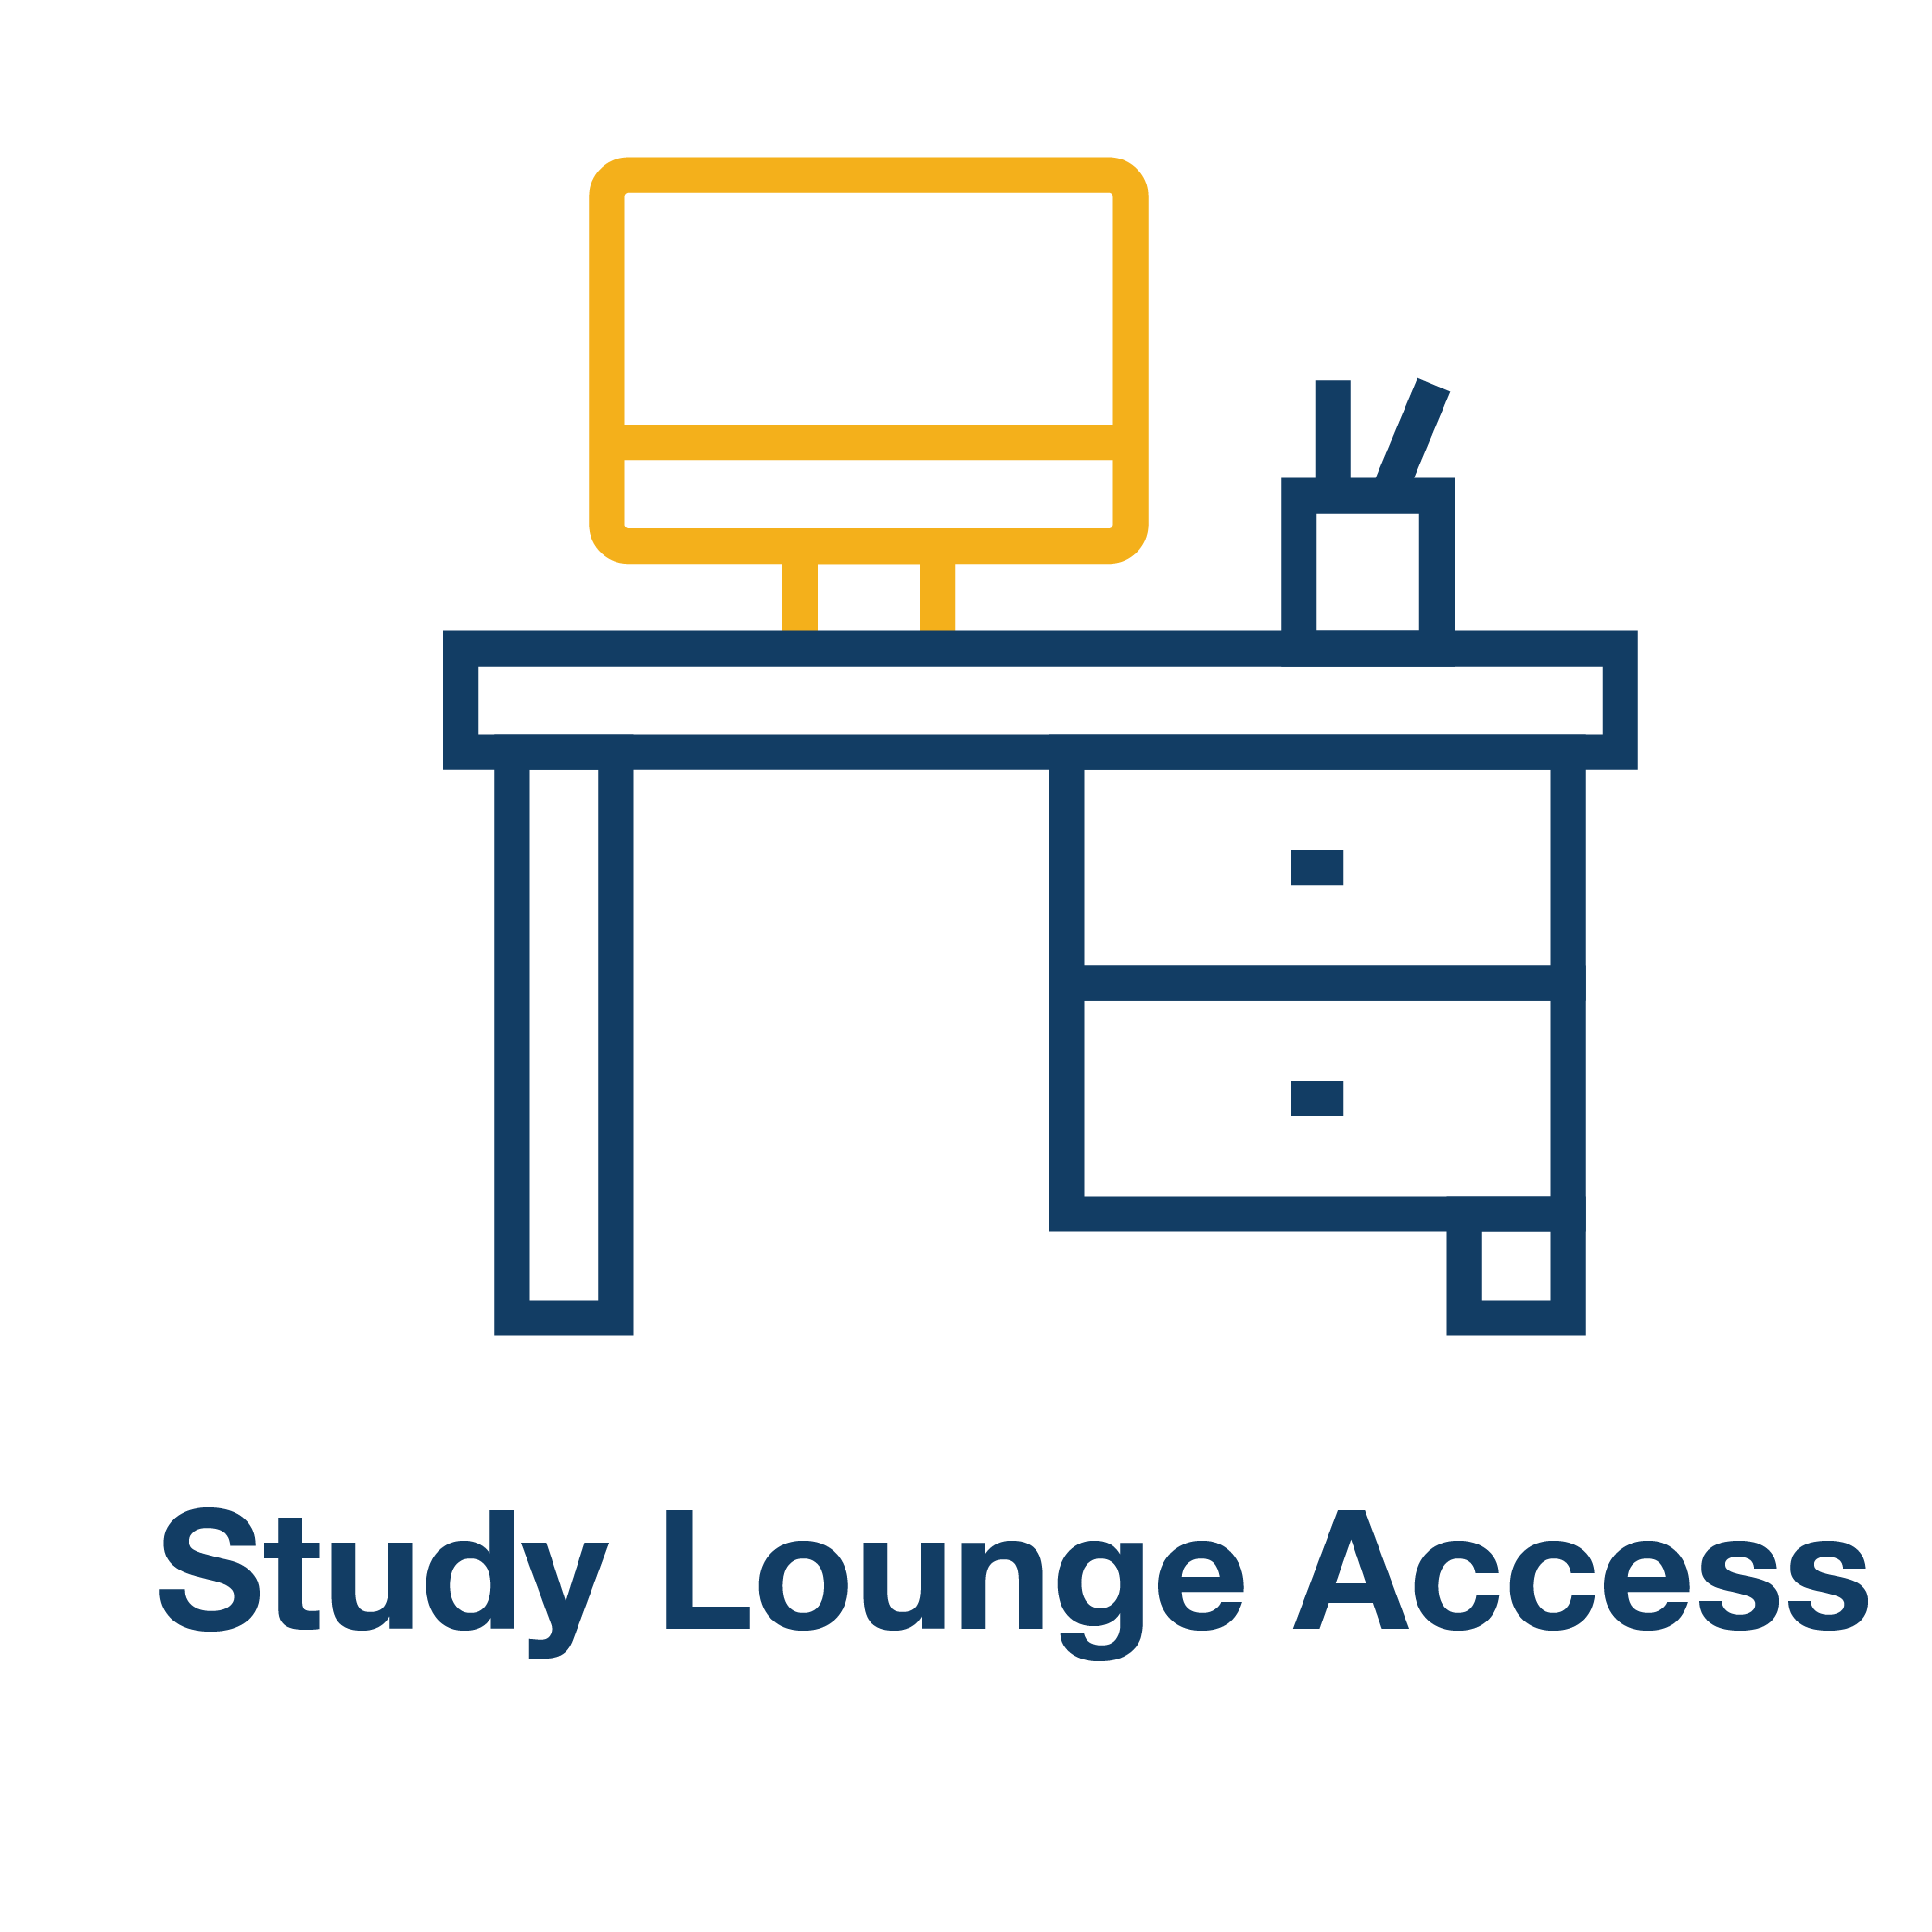 Student Lounge Access